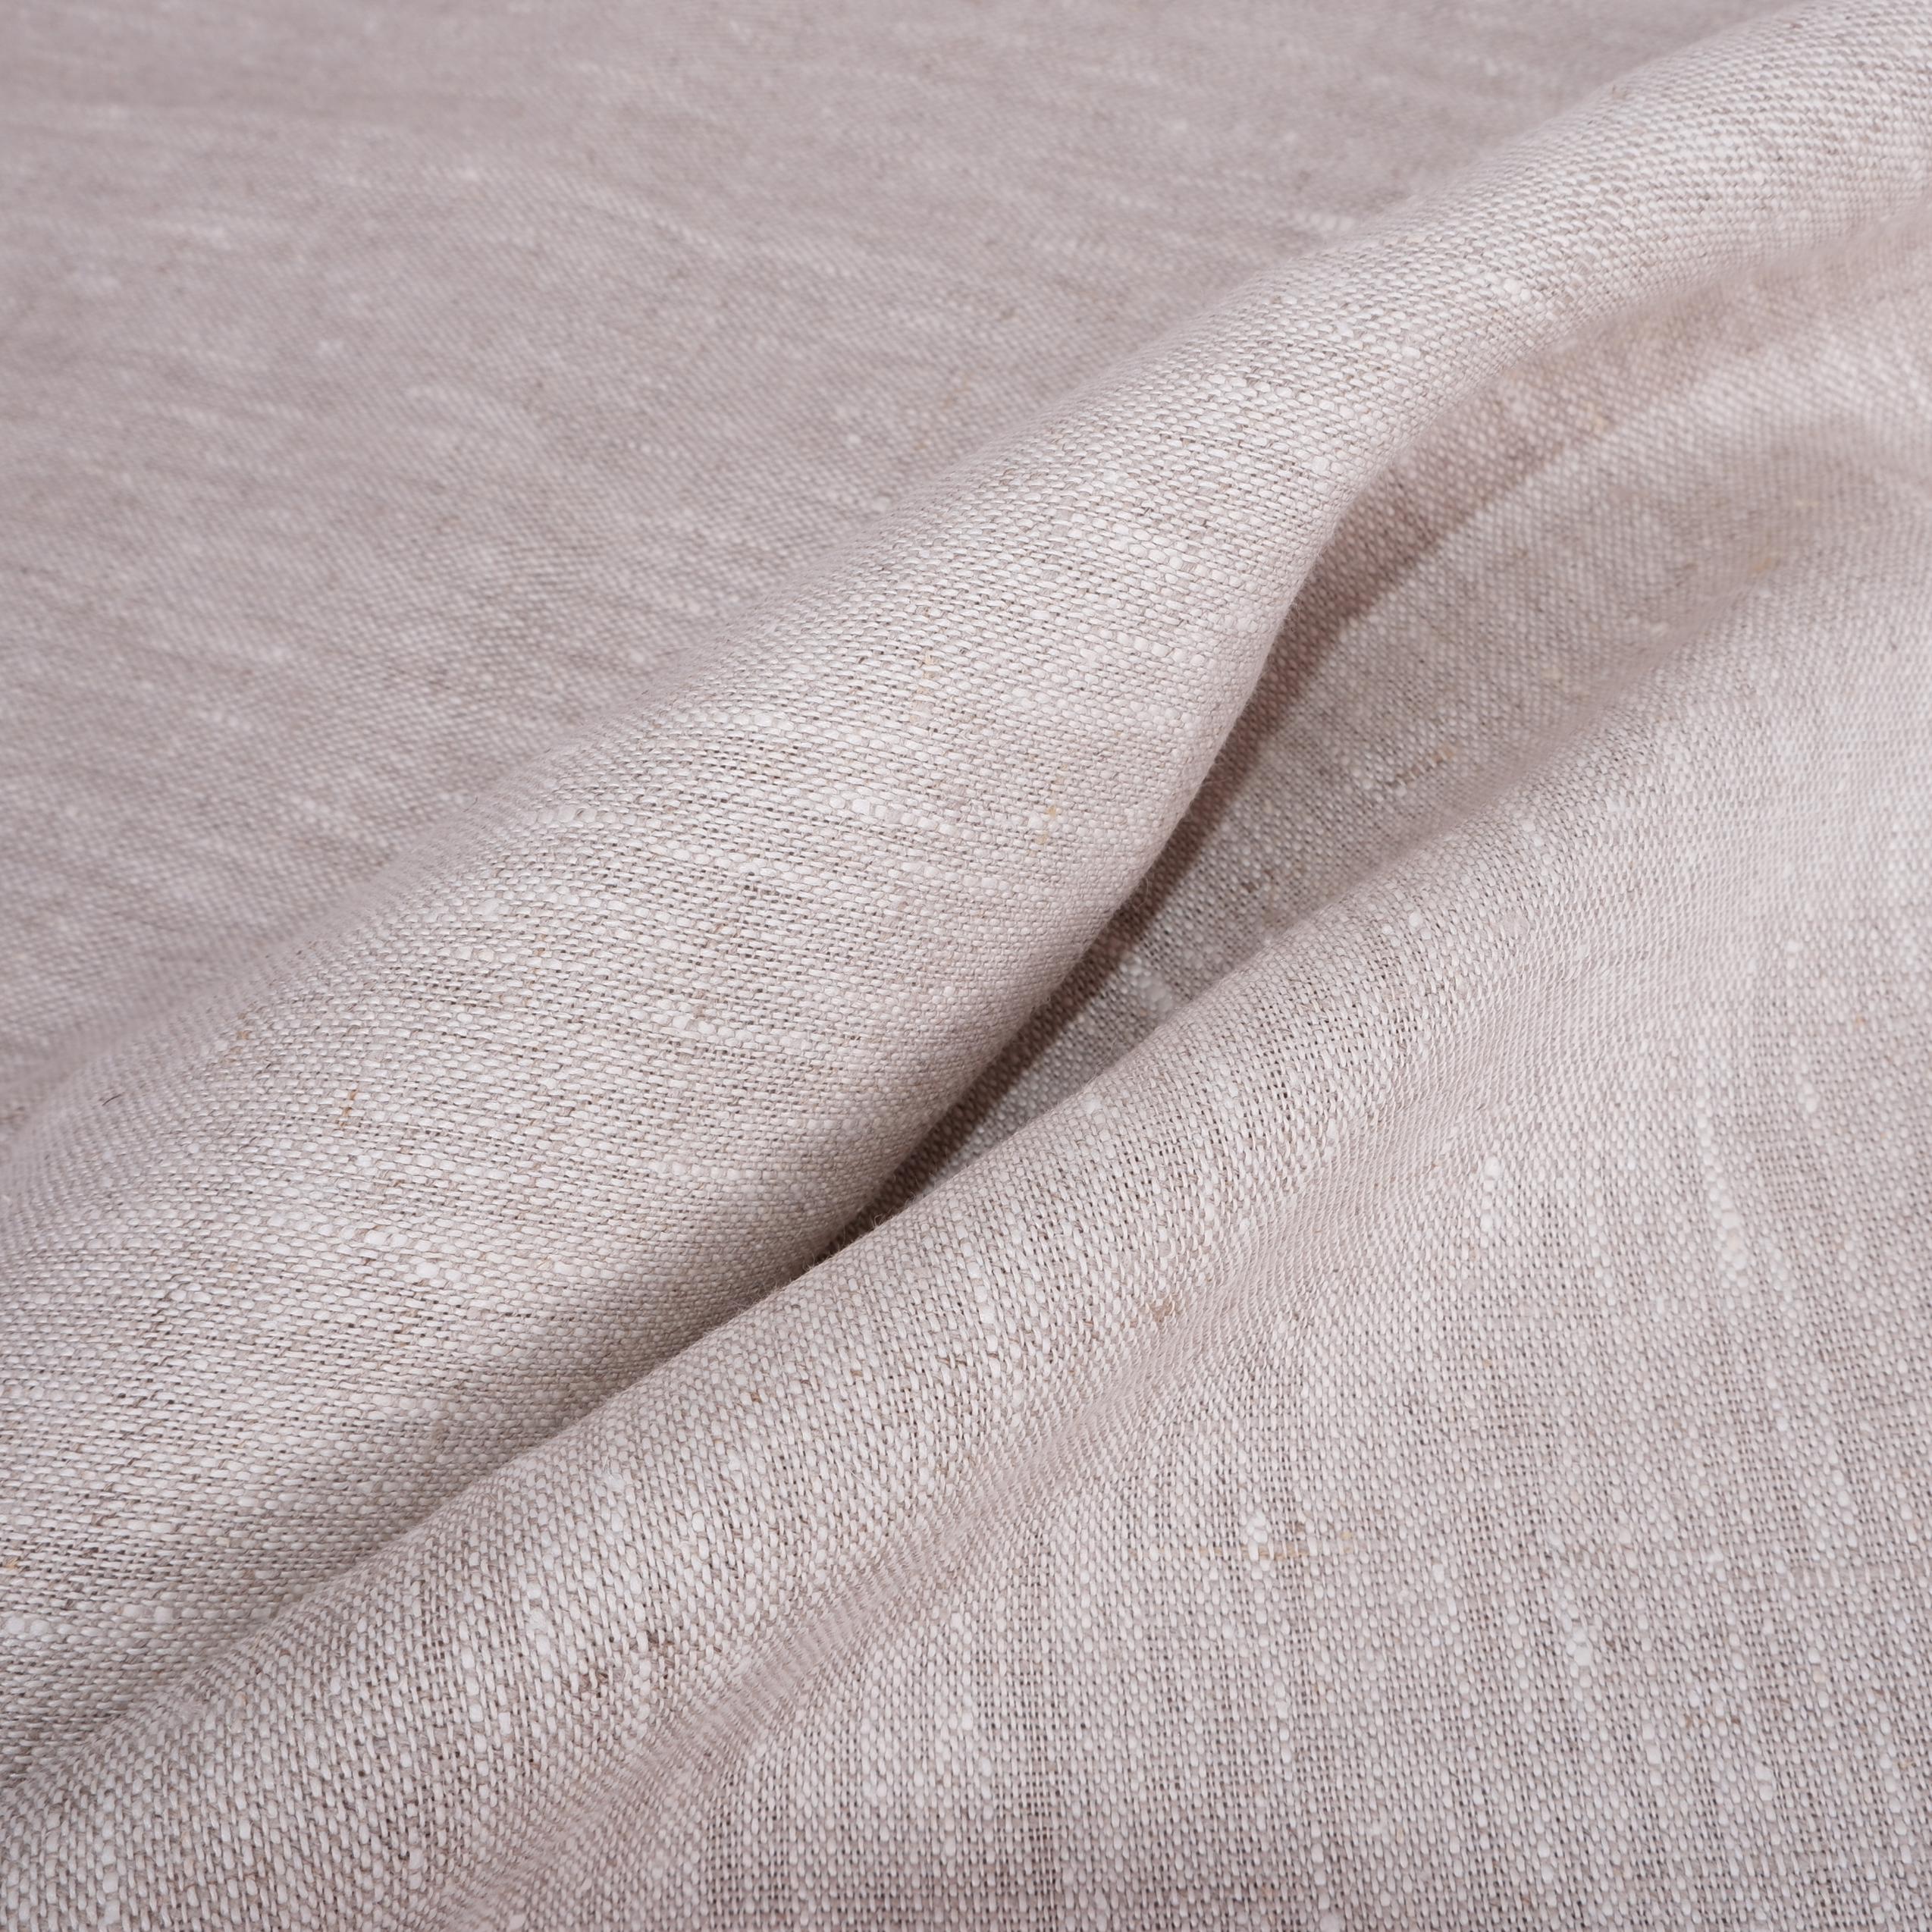 Heavy Upholstery Linen Fabric by the Yard or Meter, Washed. Linen